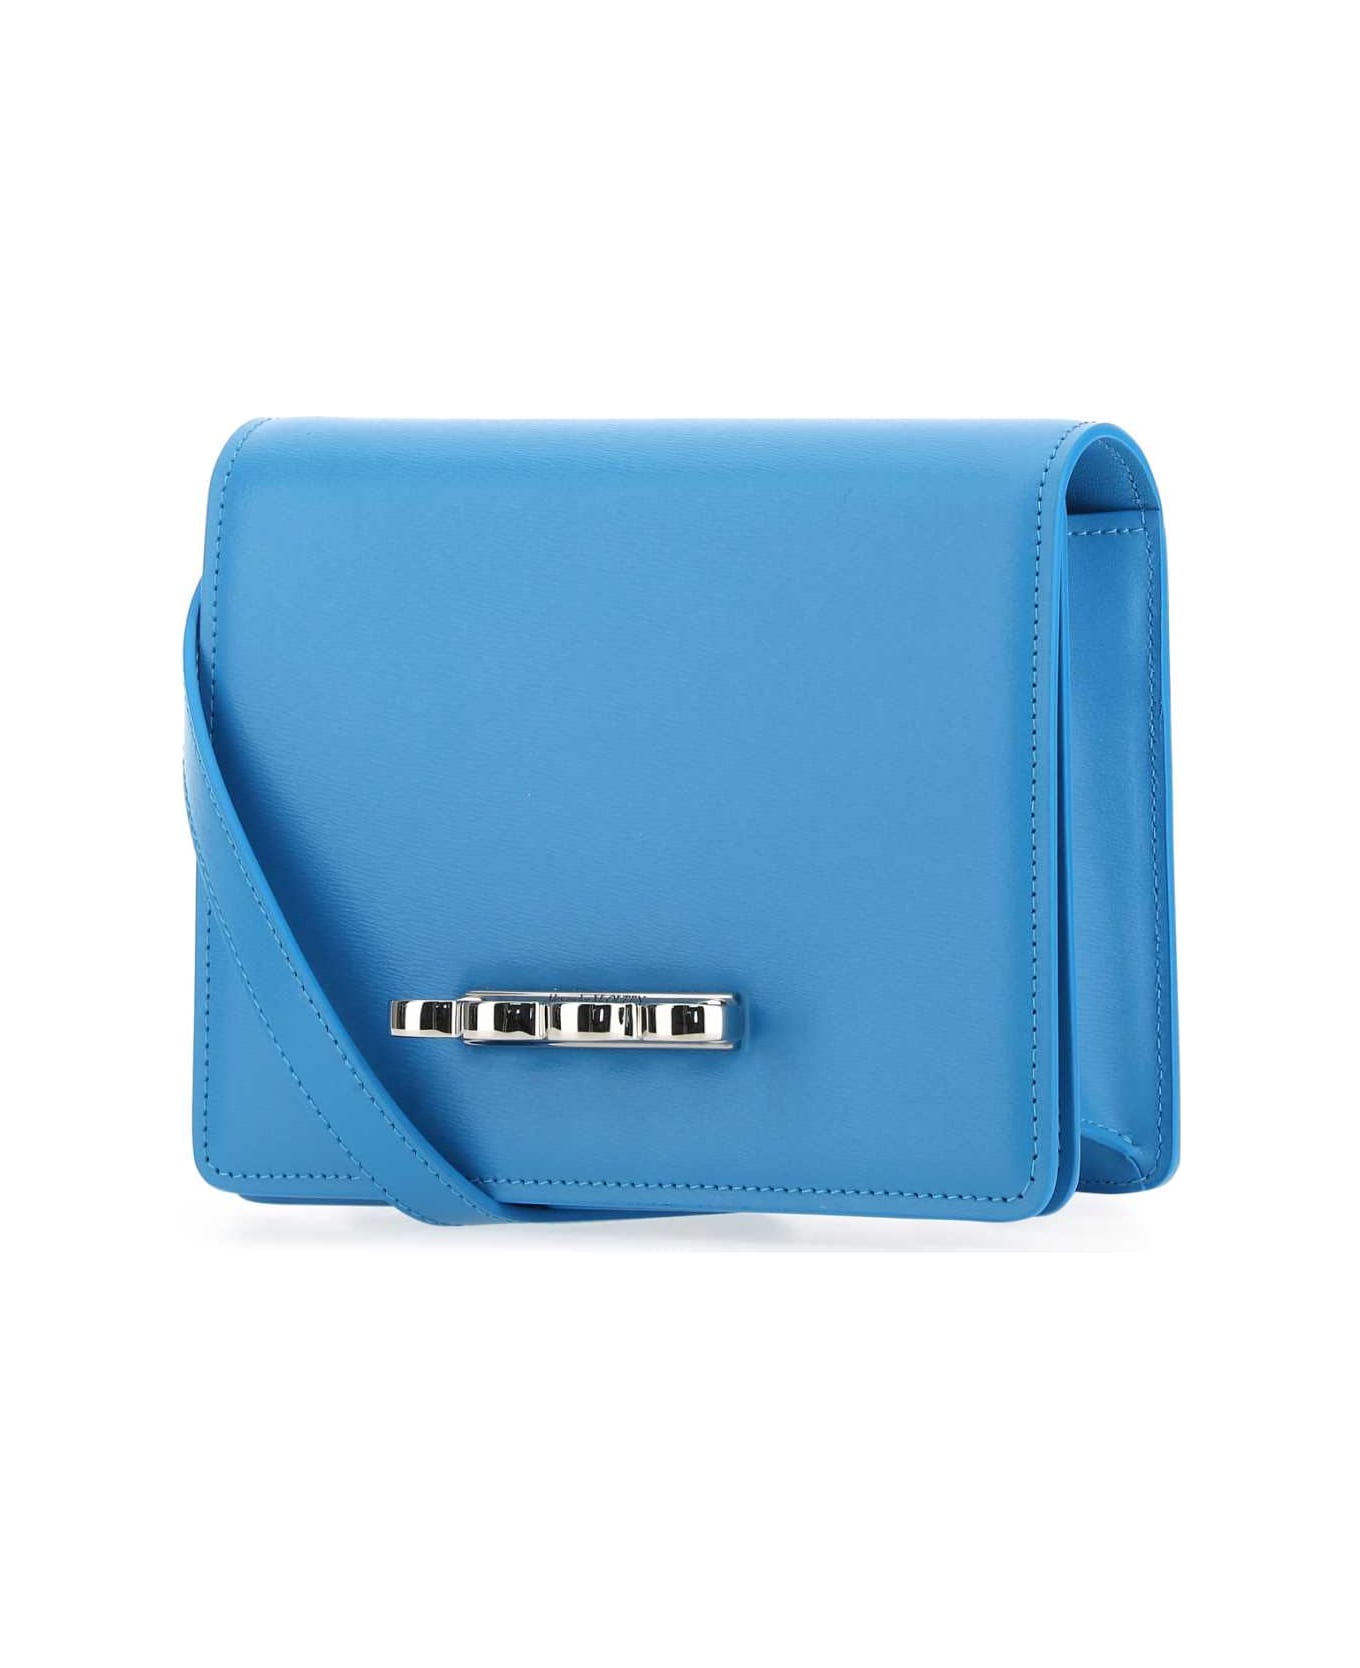 Alexander McQueen Light-blue Leather The Four Ring Clutch - 4722 ショルダーバッグ